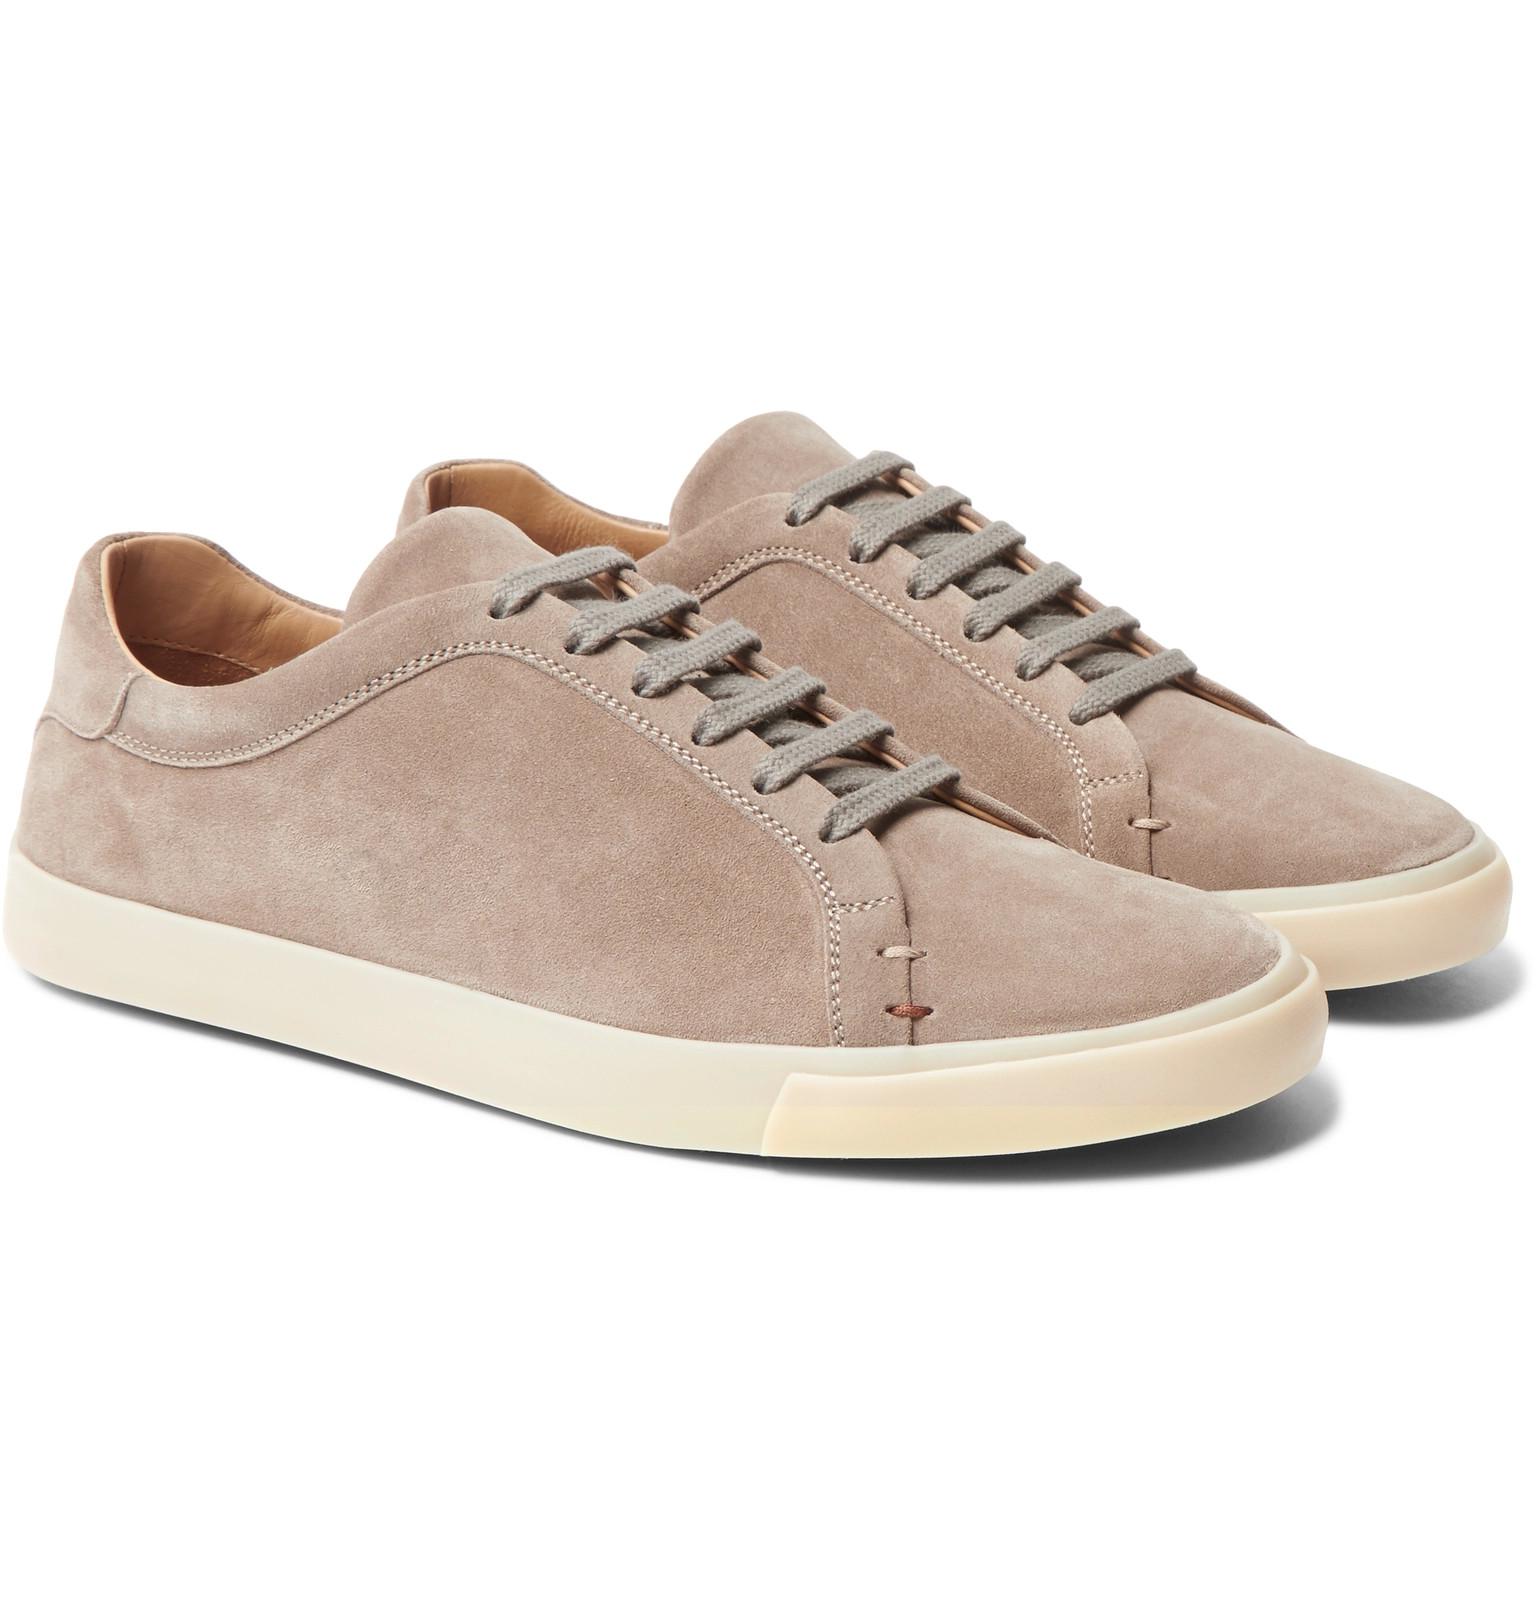 Loro Piana Freetime Suede Sneakers for Men - Lyst